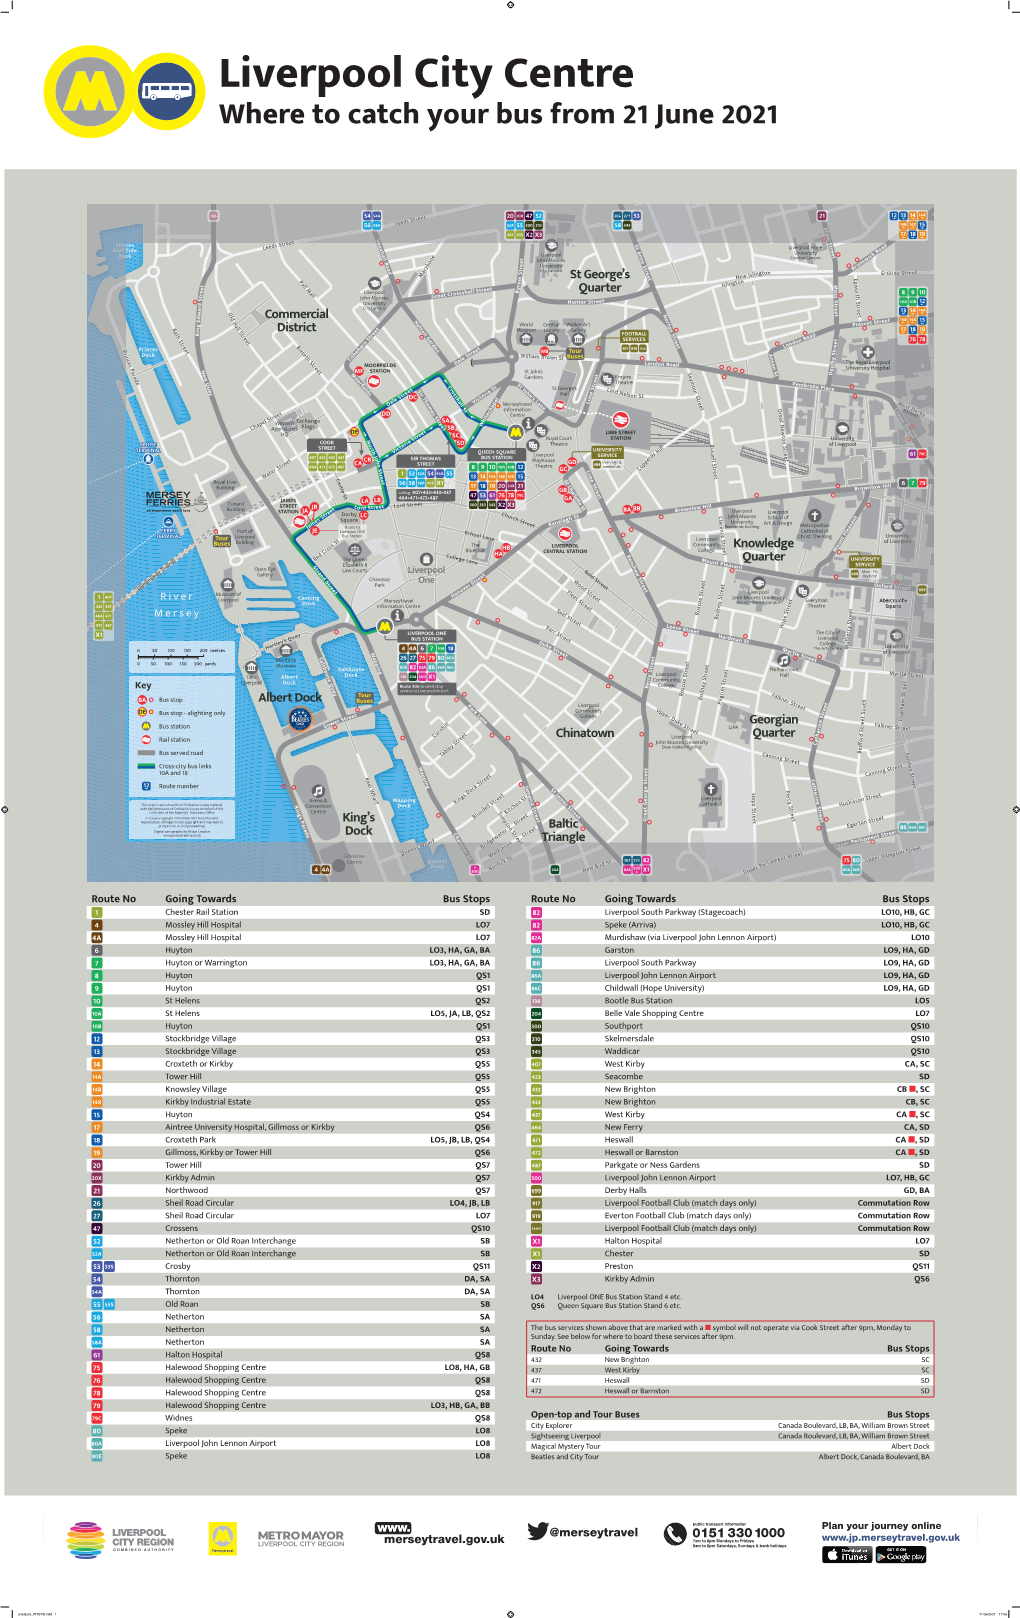 Liverpool City Centre Where to Catch Your Bus from 21 June 2021